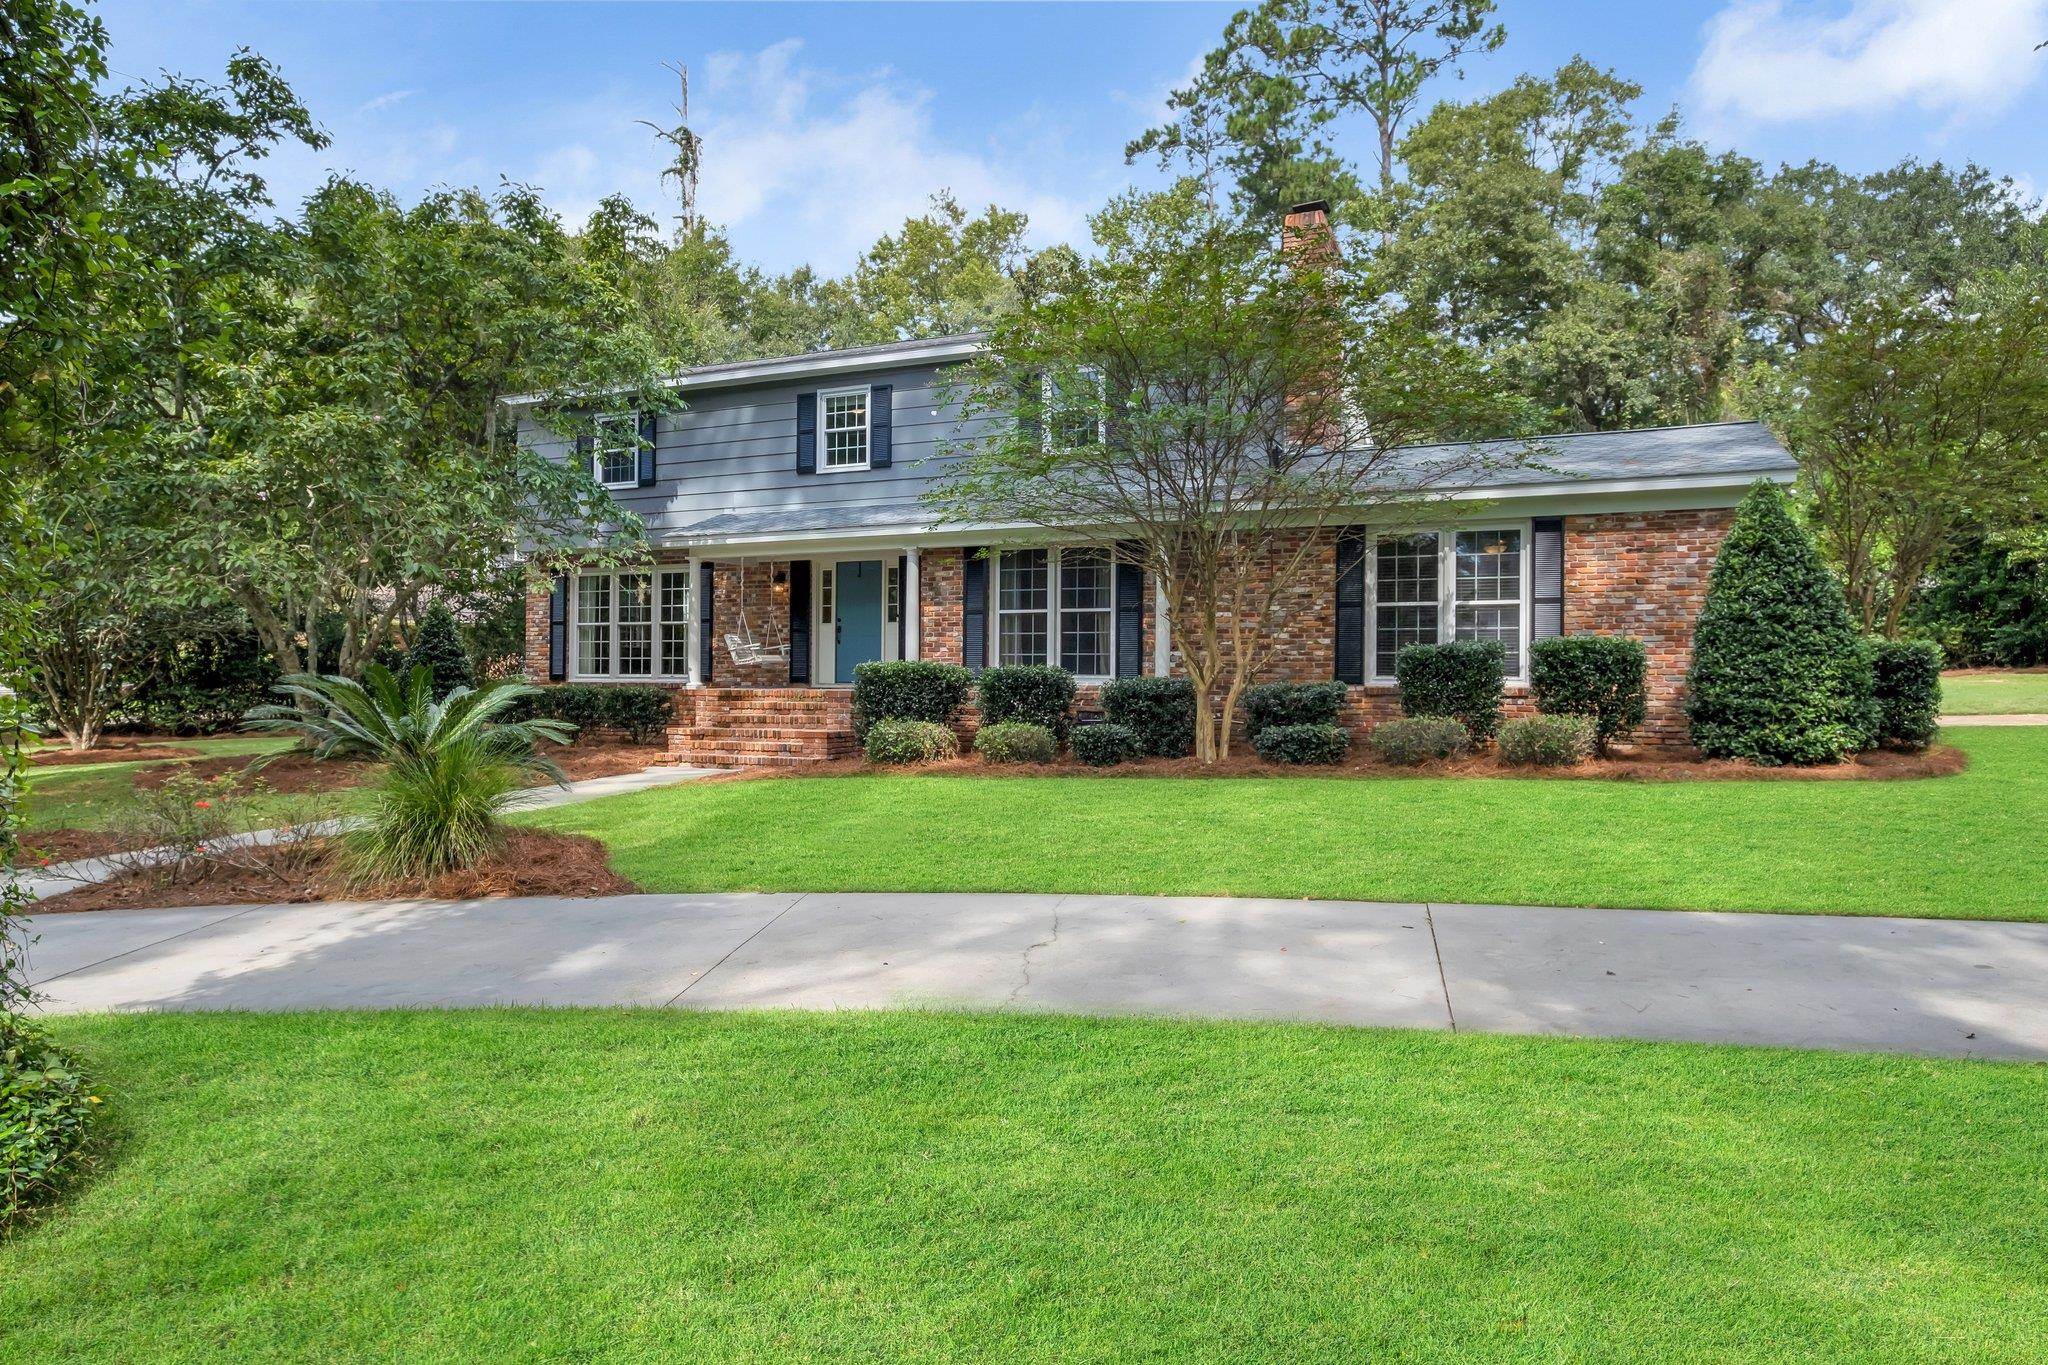 2402 Chamberlin Drive,TALLAHASSEE,Florida 32308,4 Bedrooms Bedrooms,2 BathroomsBathrooms,Detached single family,2402 Chamberlin Drive,364809